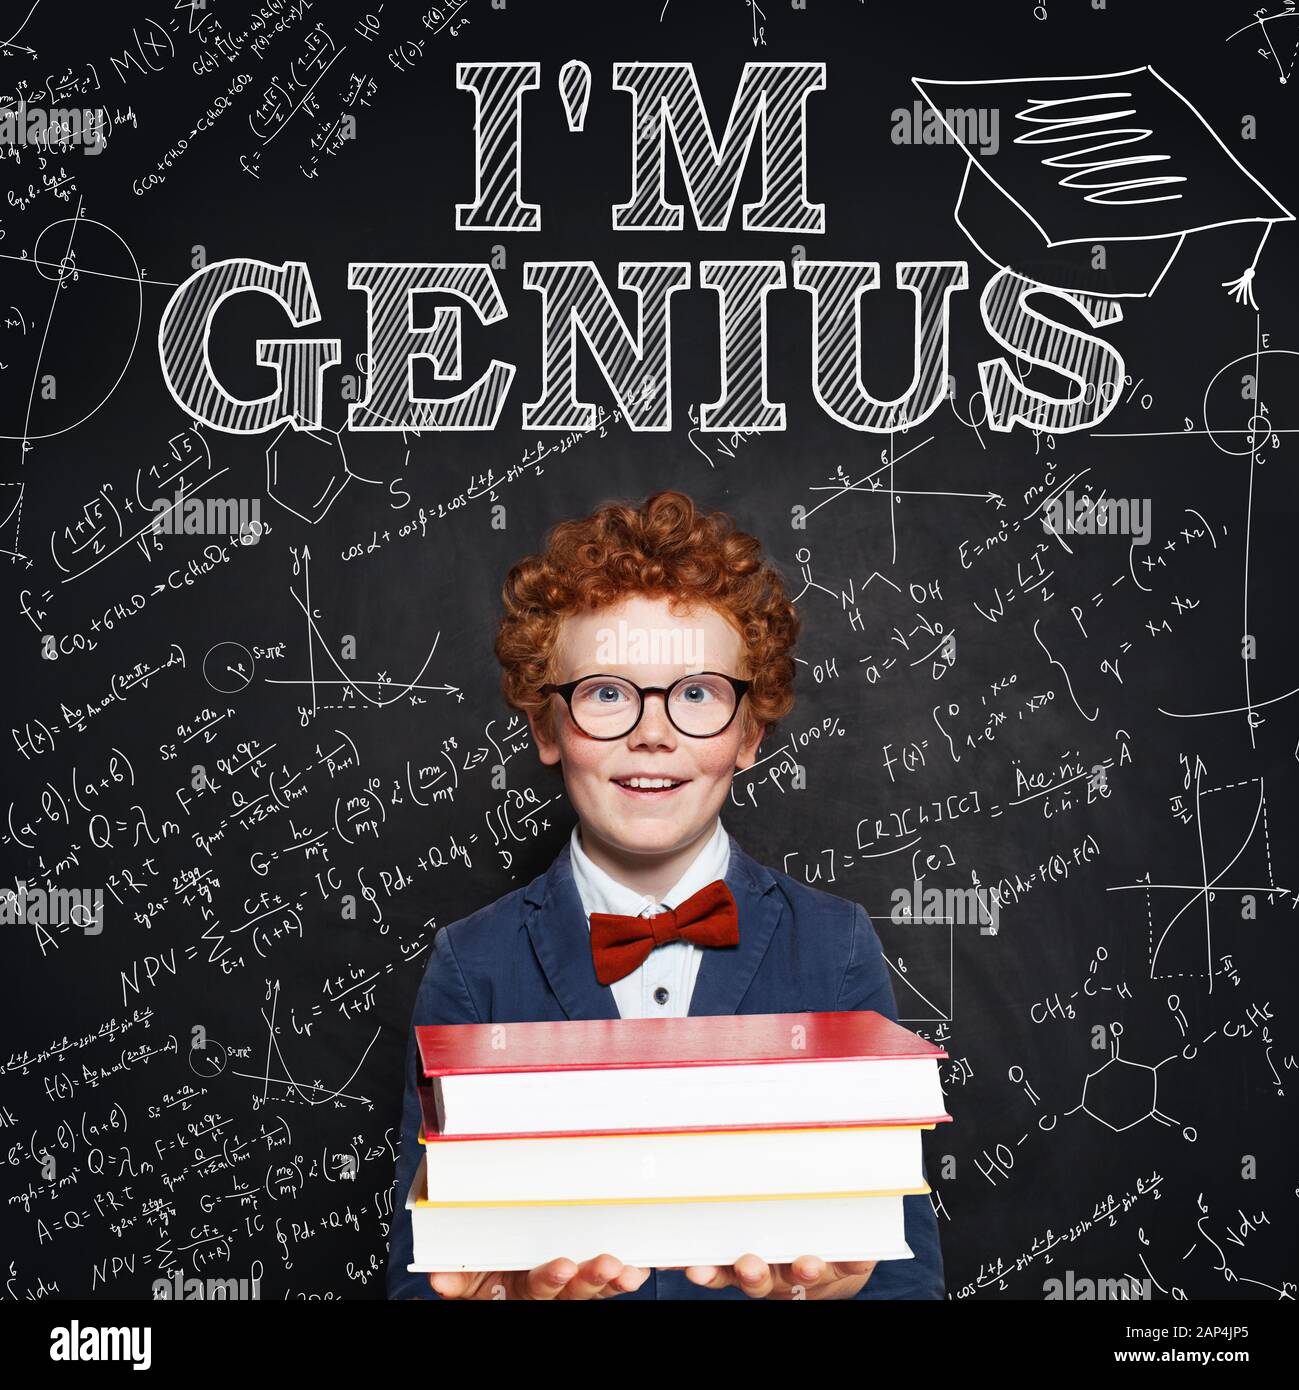 Student child boy genius with books on chalkboard. Kid 9 year old Stock Photo